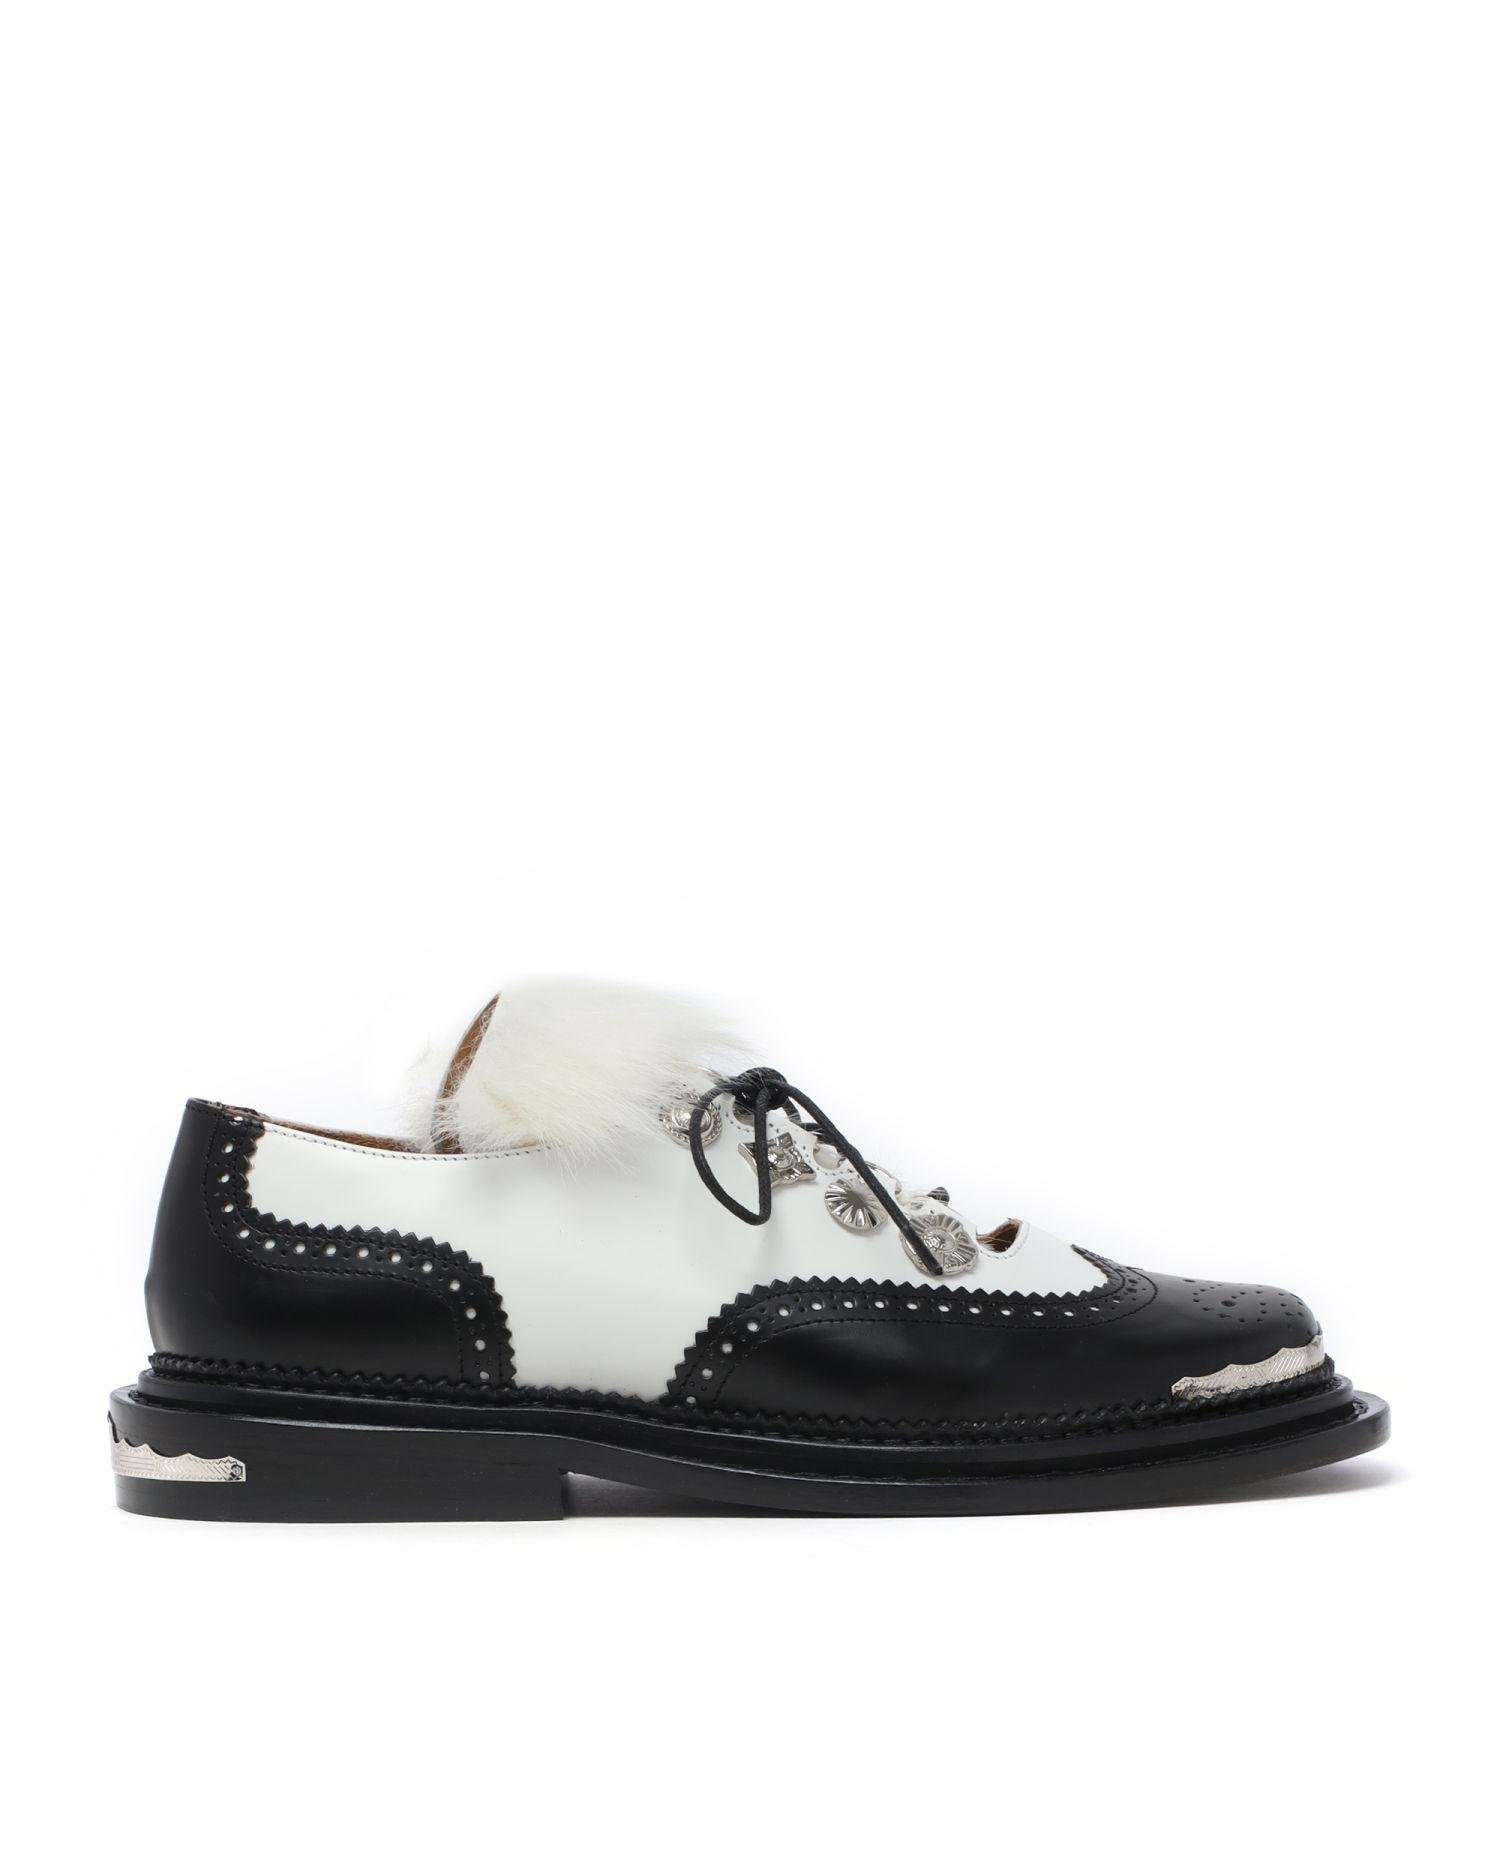 Embellished leather oxfords by TOGA